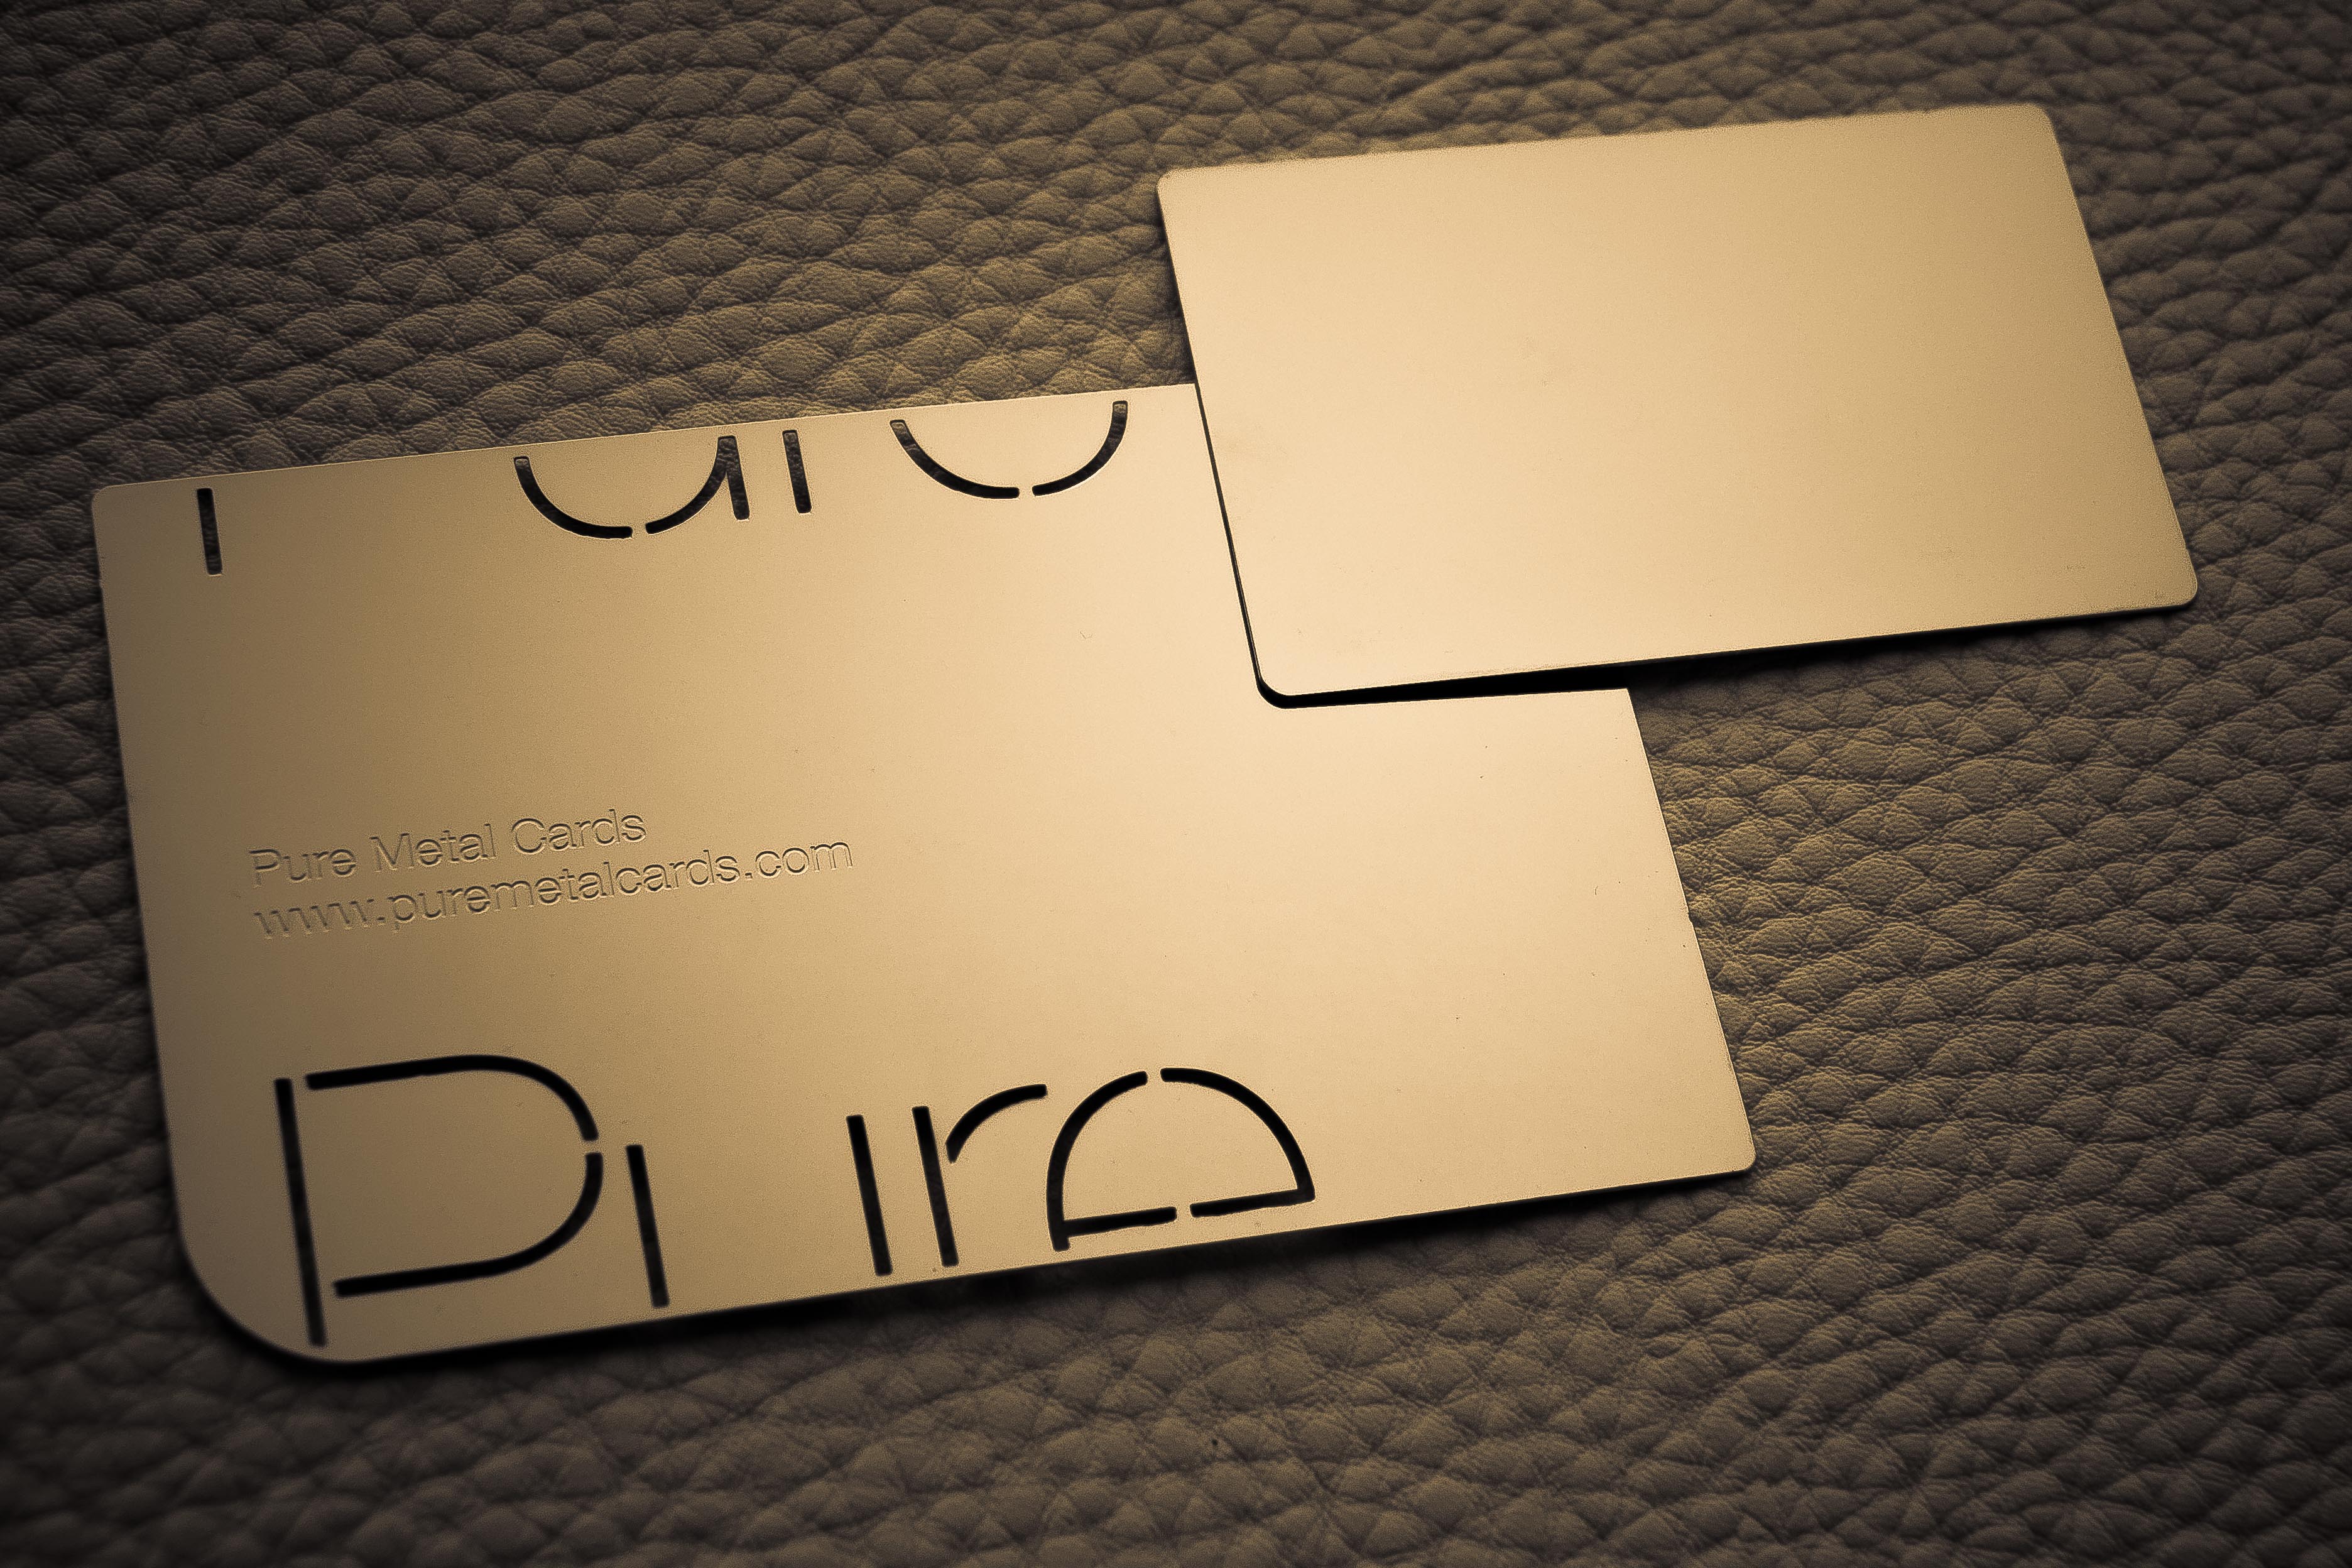 How To Make The Ultimate Business Card For Your Tech Business